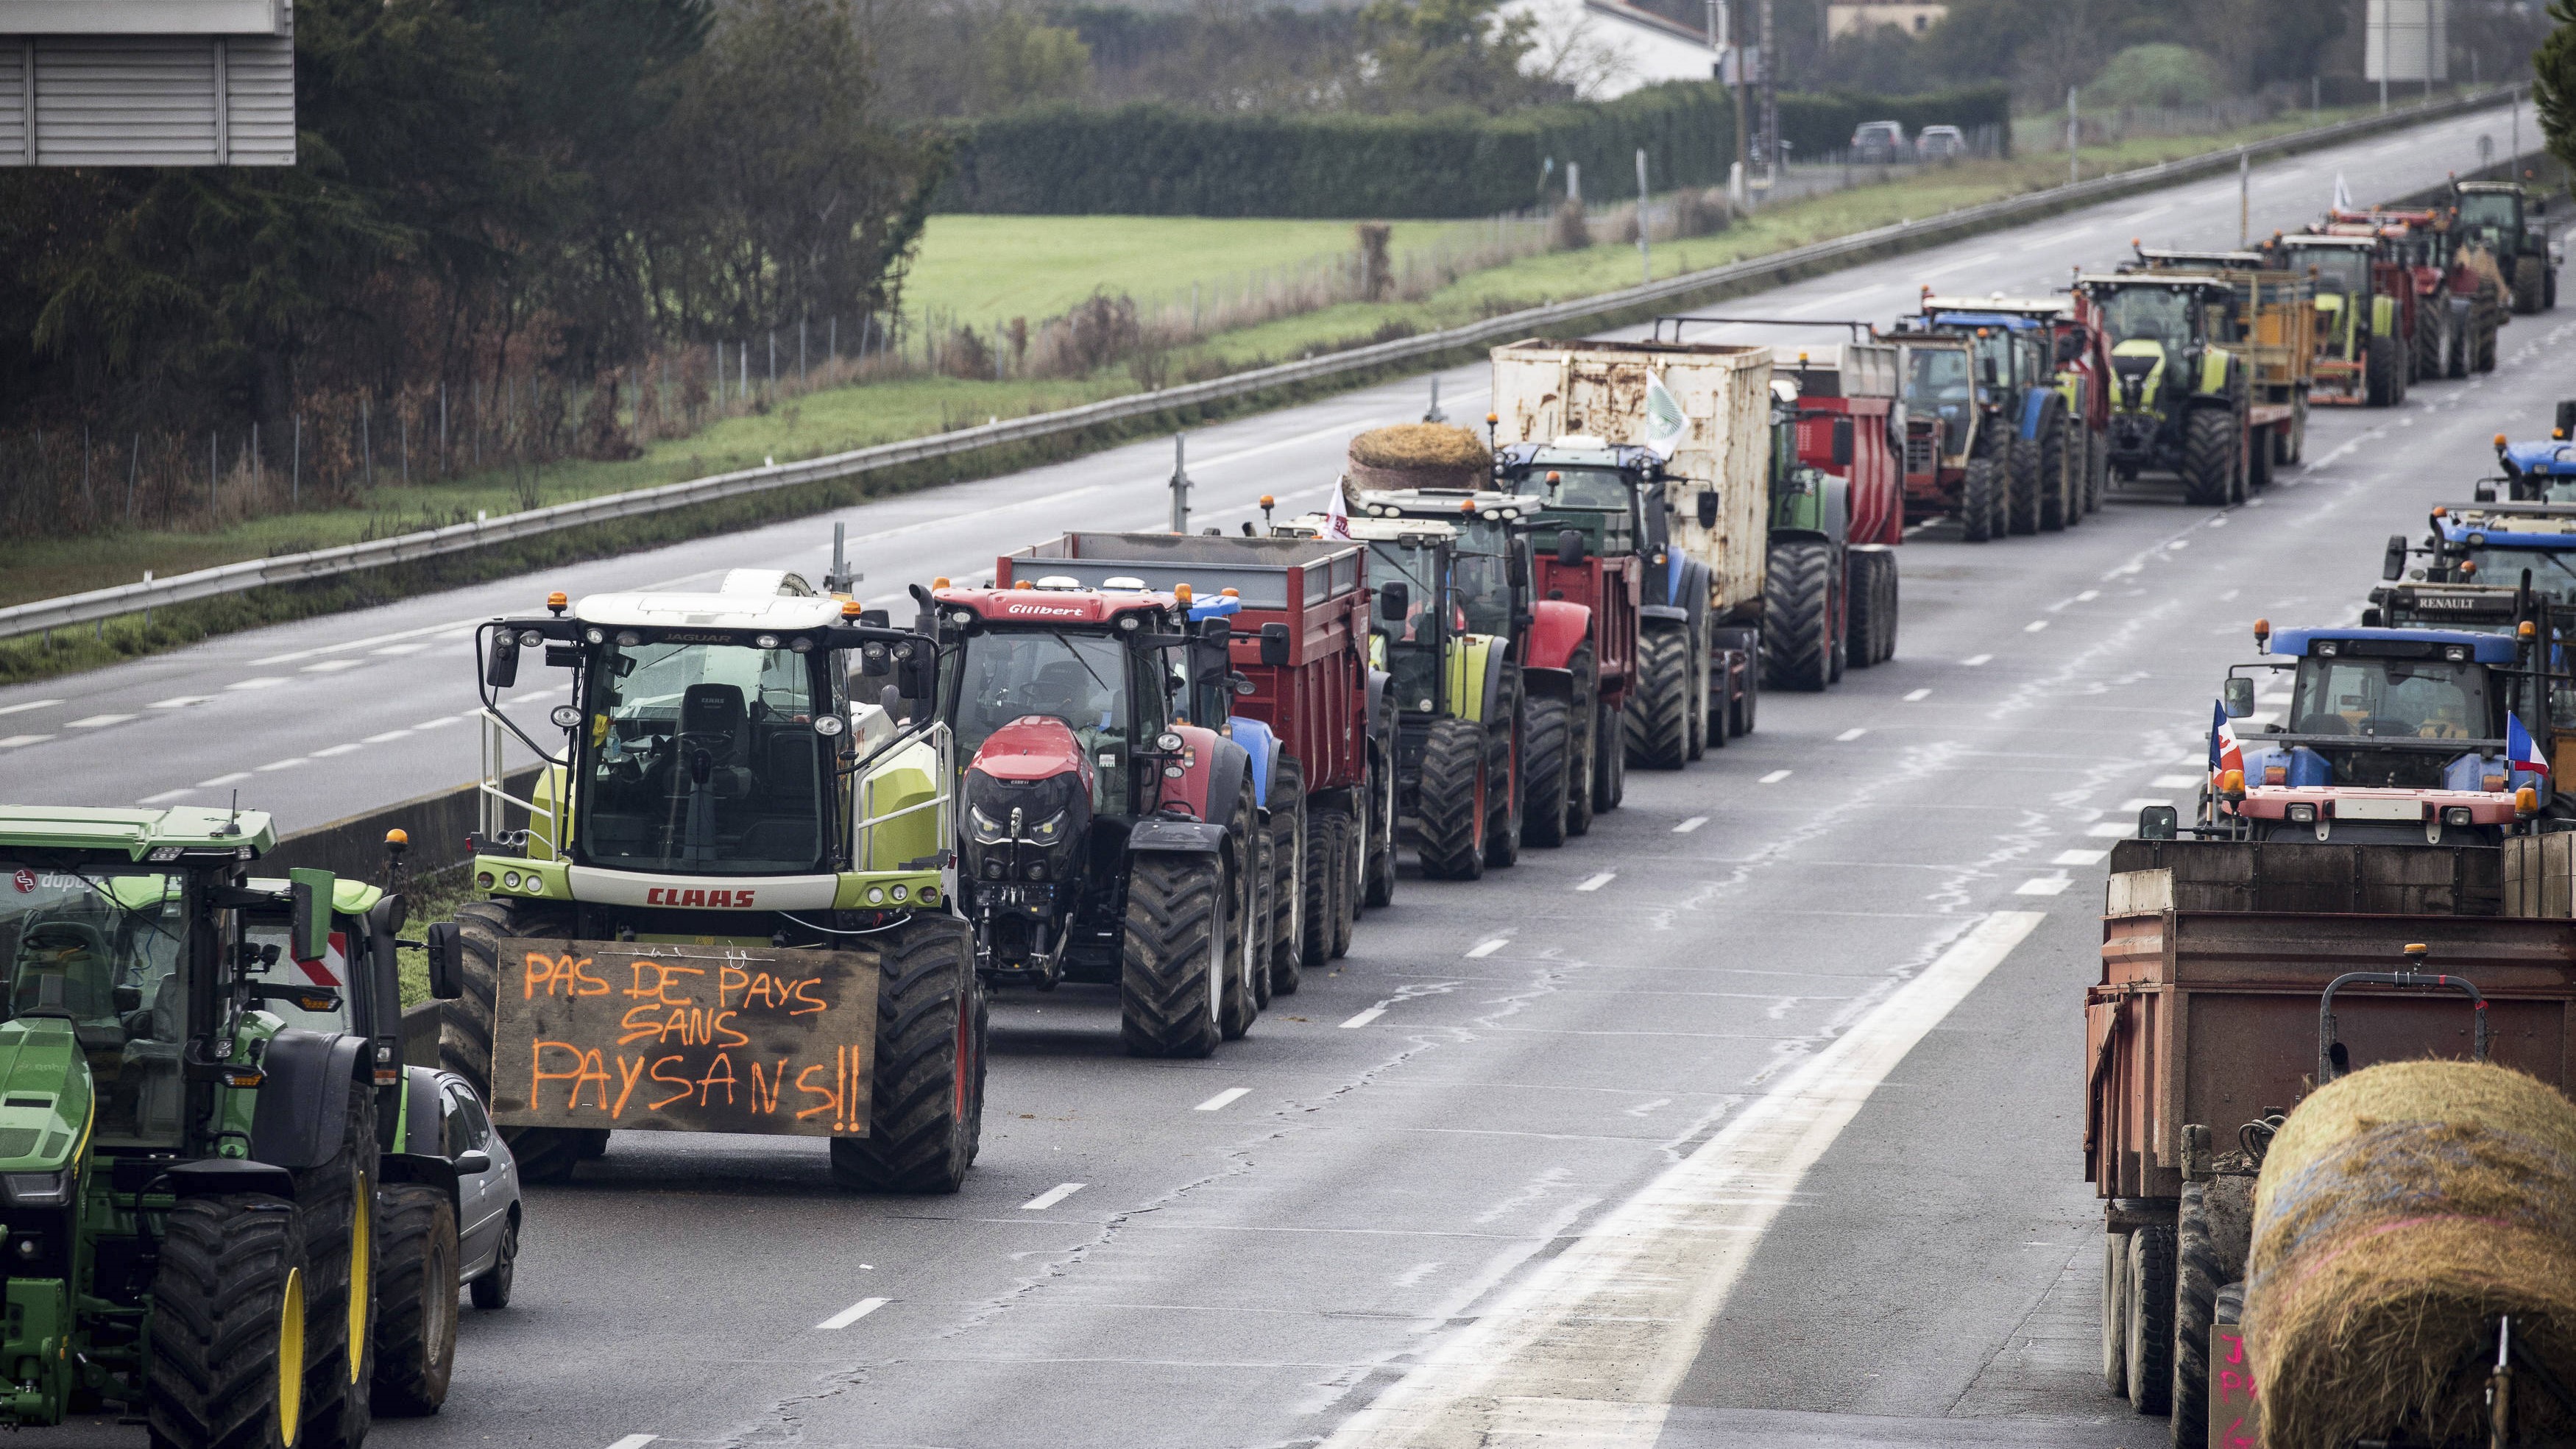 European Farmers’ Protests Spread to France | WPR Daily Review